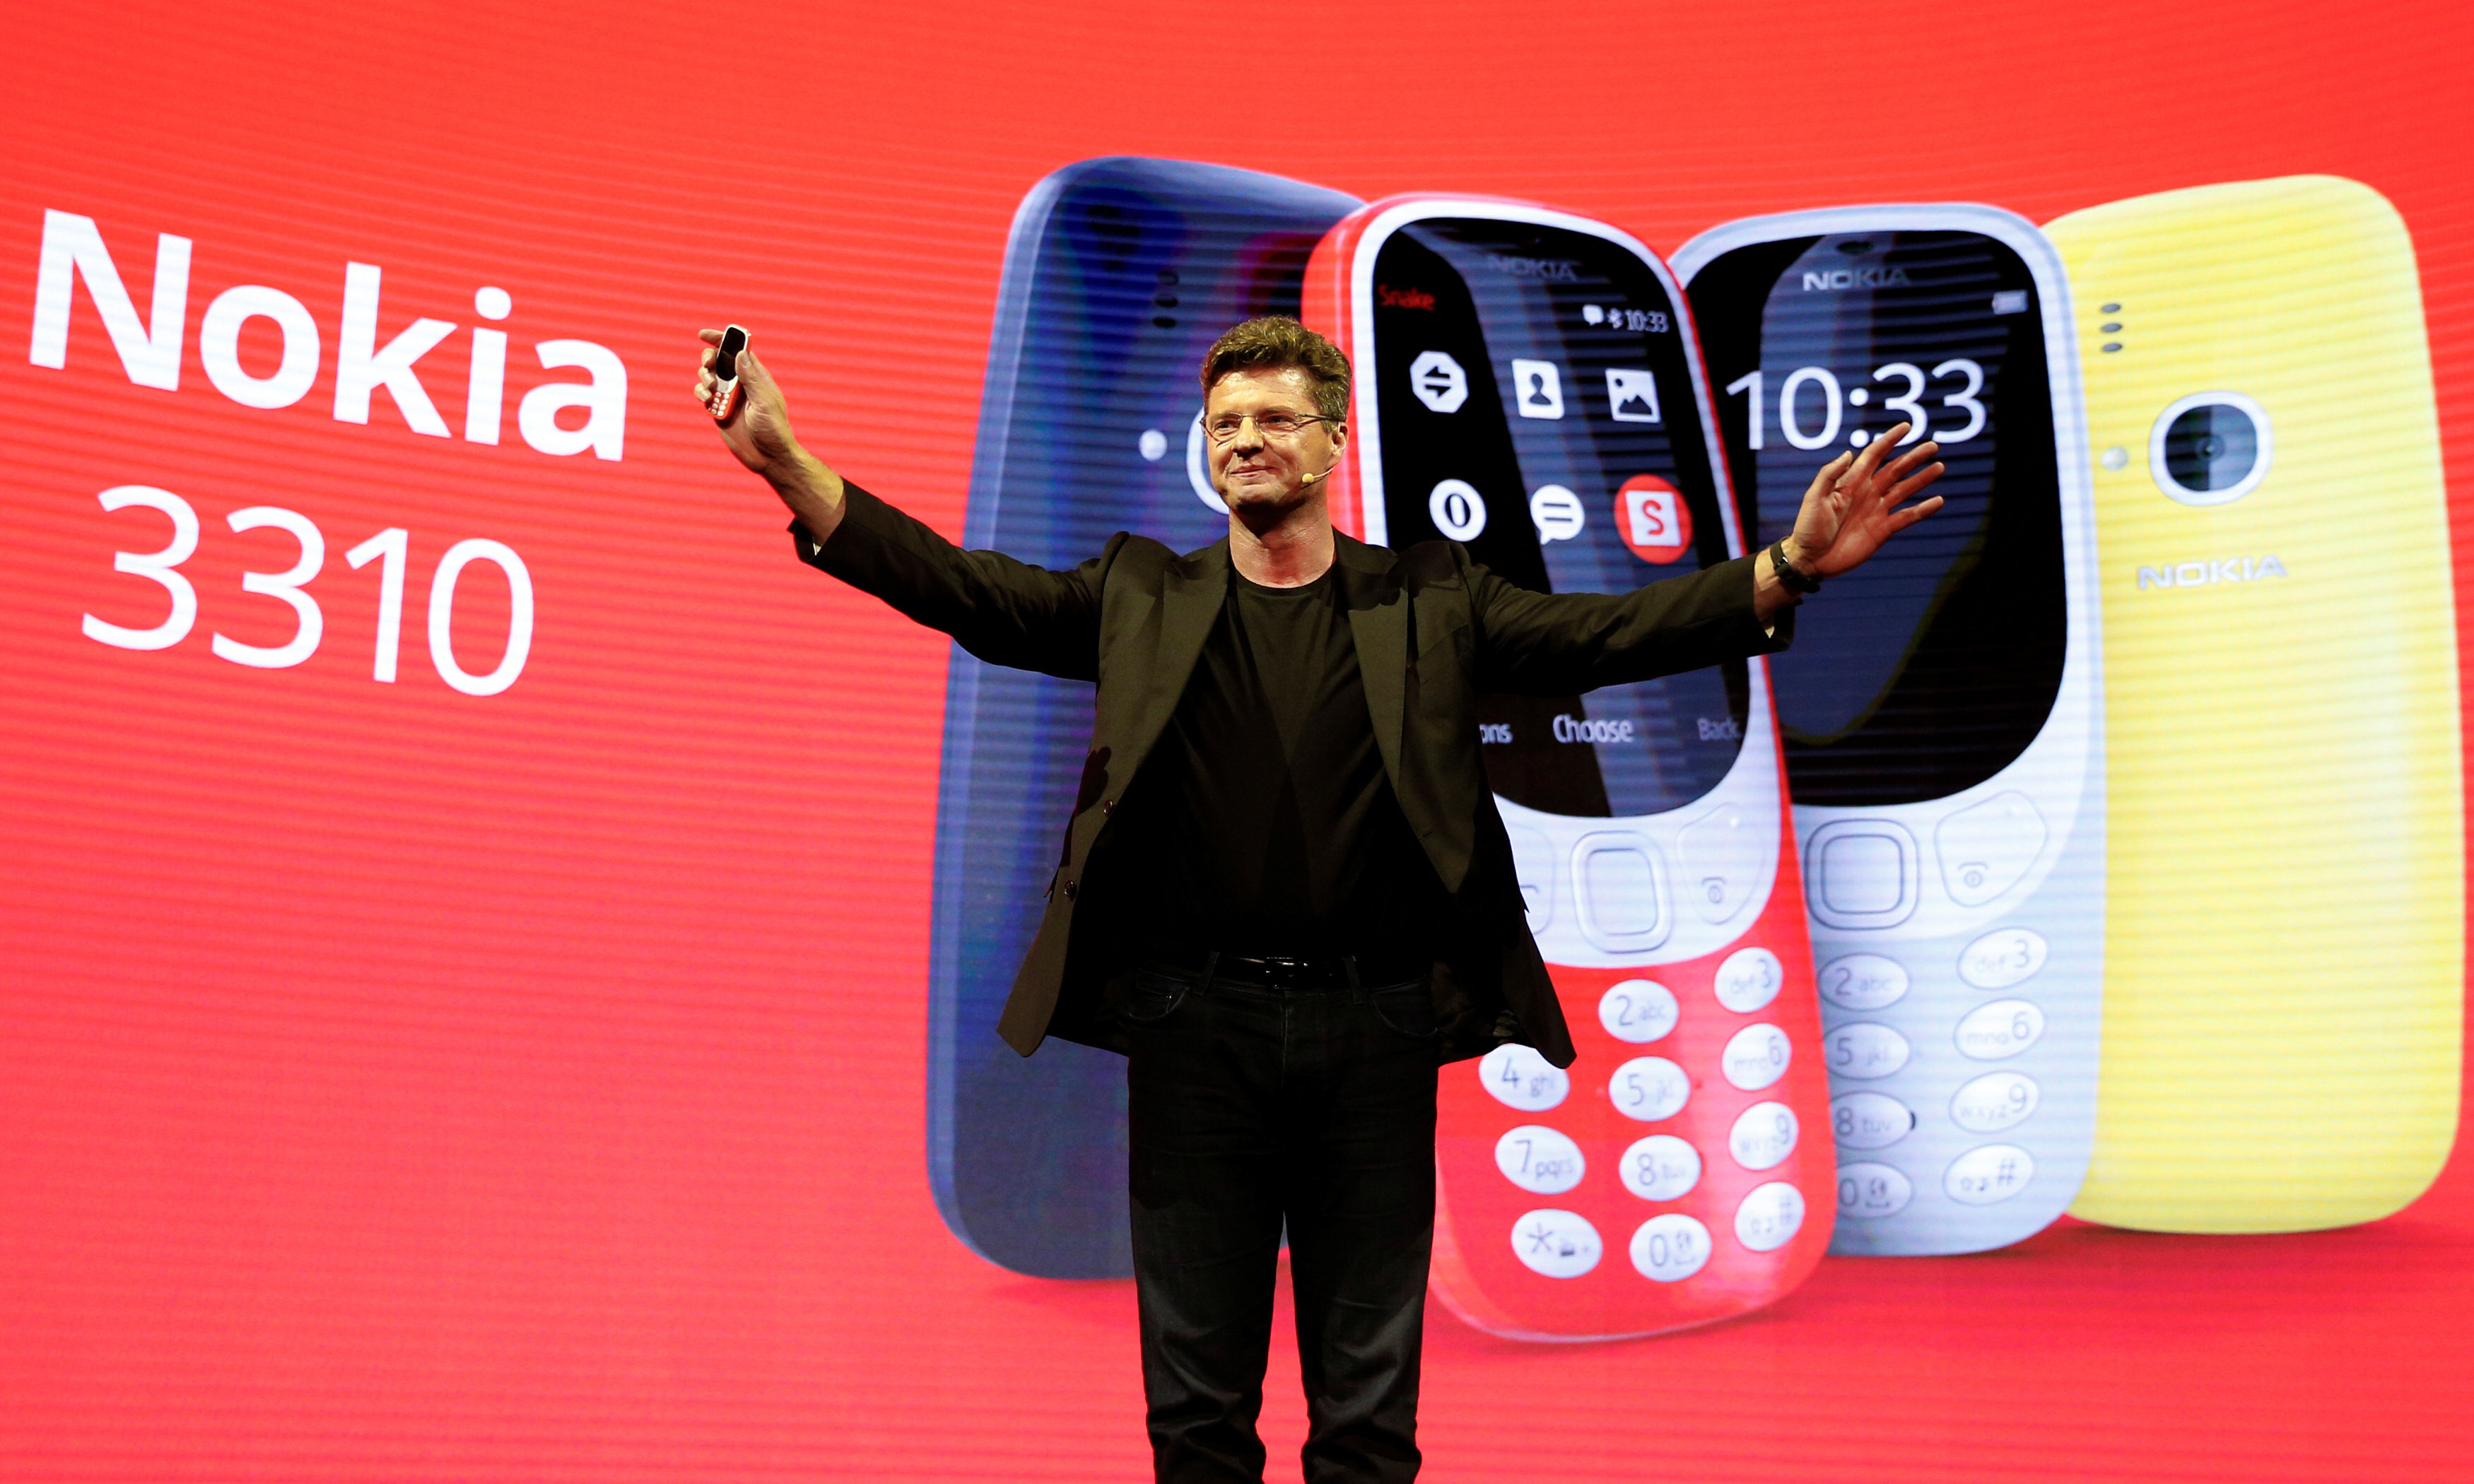 arto nummela ceo of nokia hmd holds up a nokia 3310 device during a presentation ceremony at mobile world congress in barcelona spain february 26 2017 photo afp